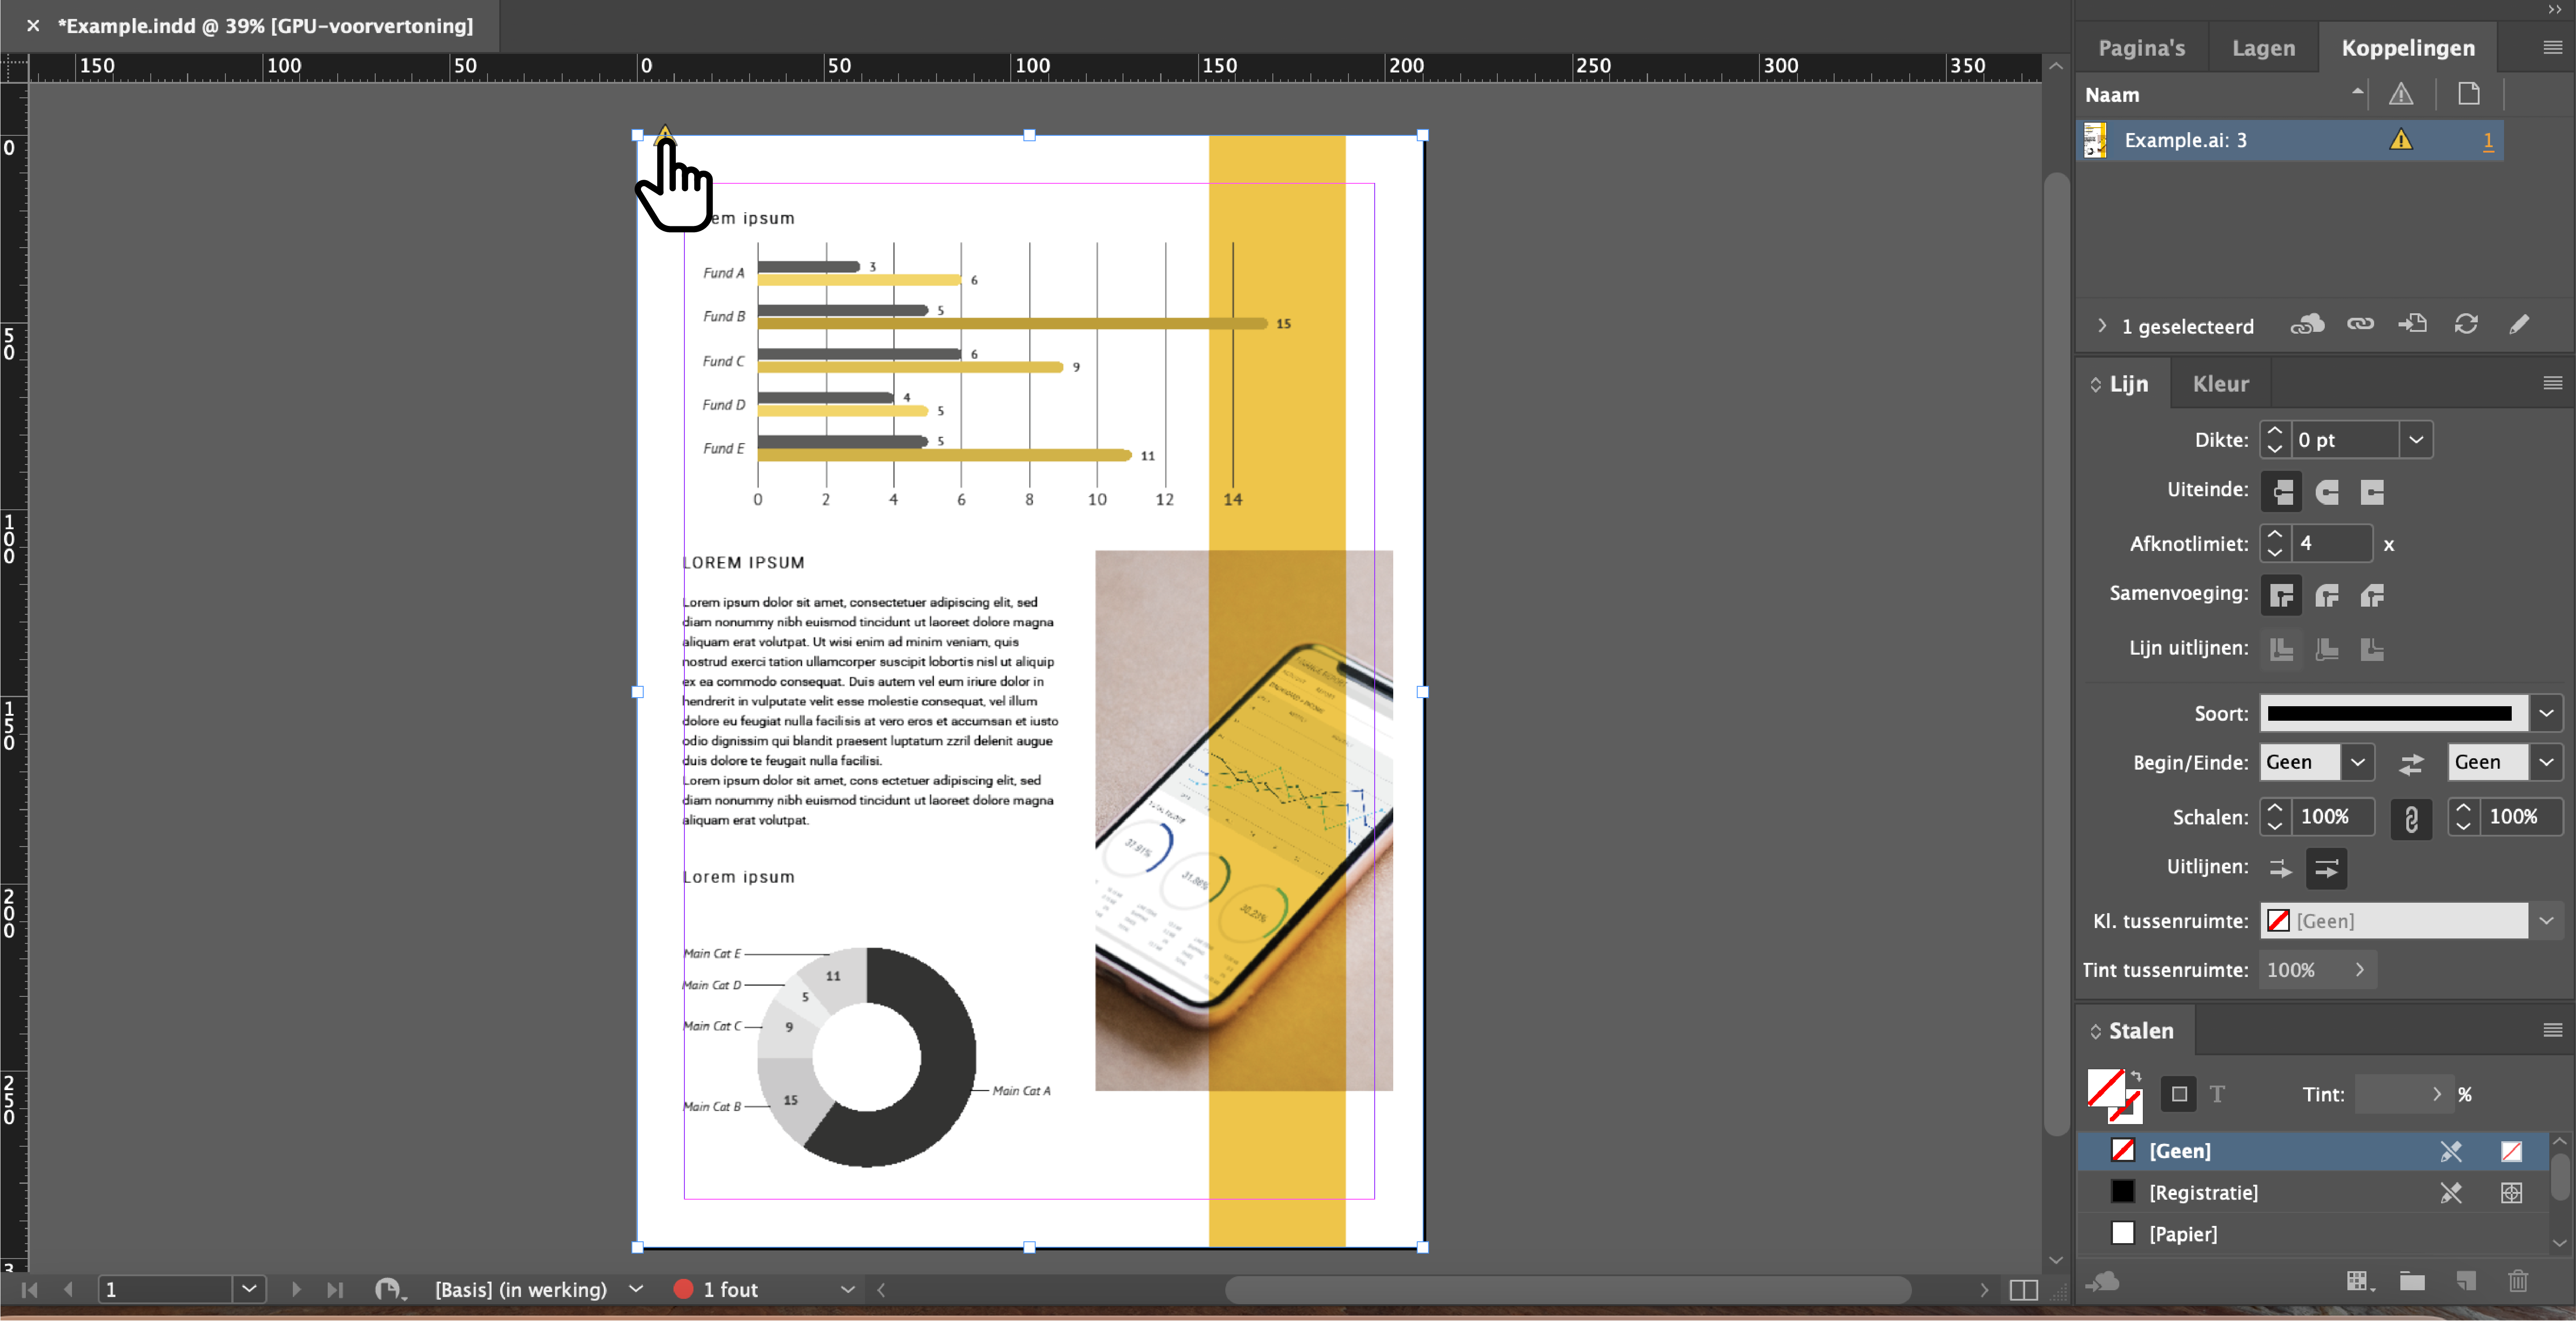 How to create a multi-page report with Datylon charts using Adobe InDesign.